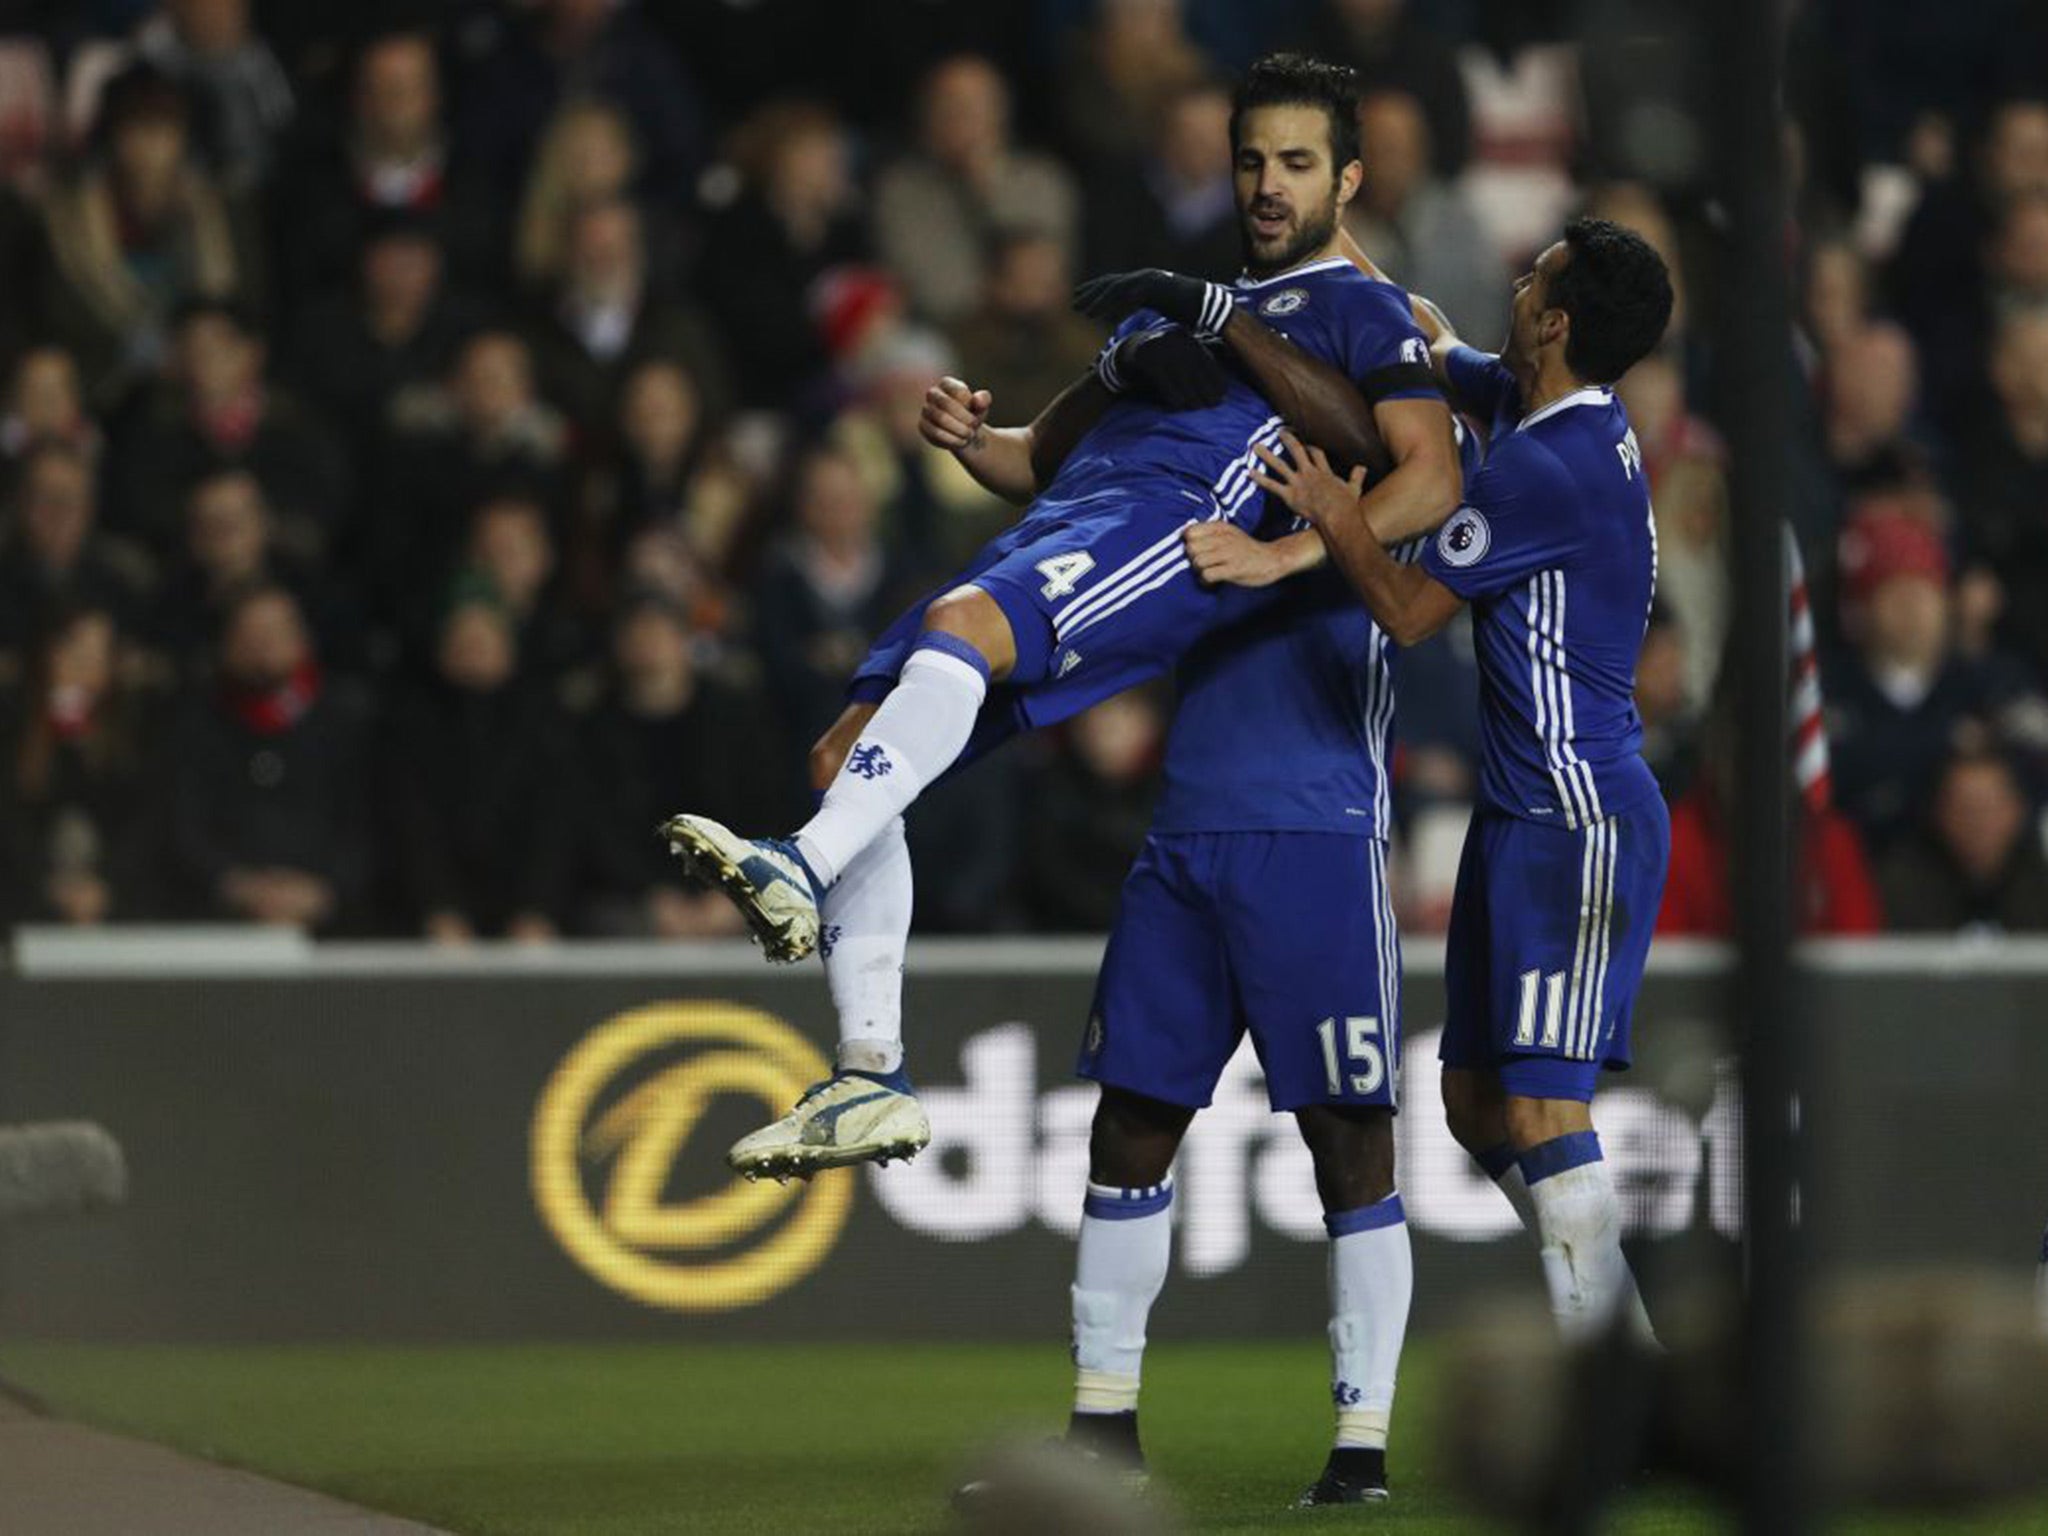 Fabregas opened the scoring after a one-two with Willian